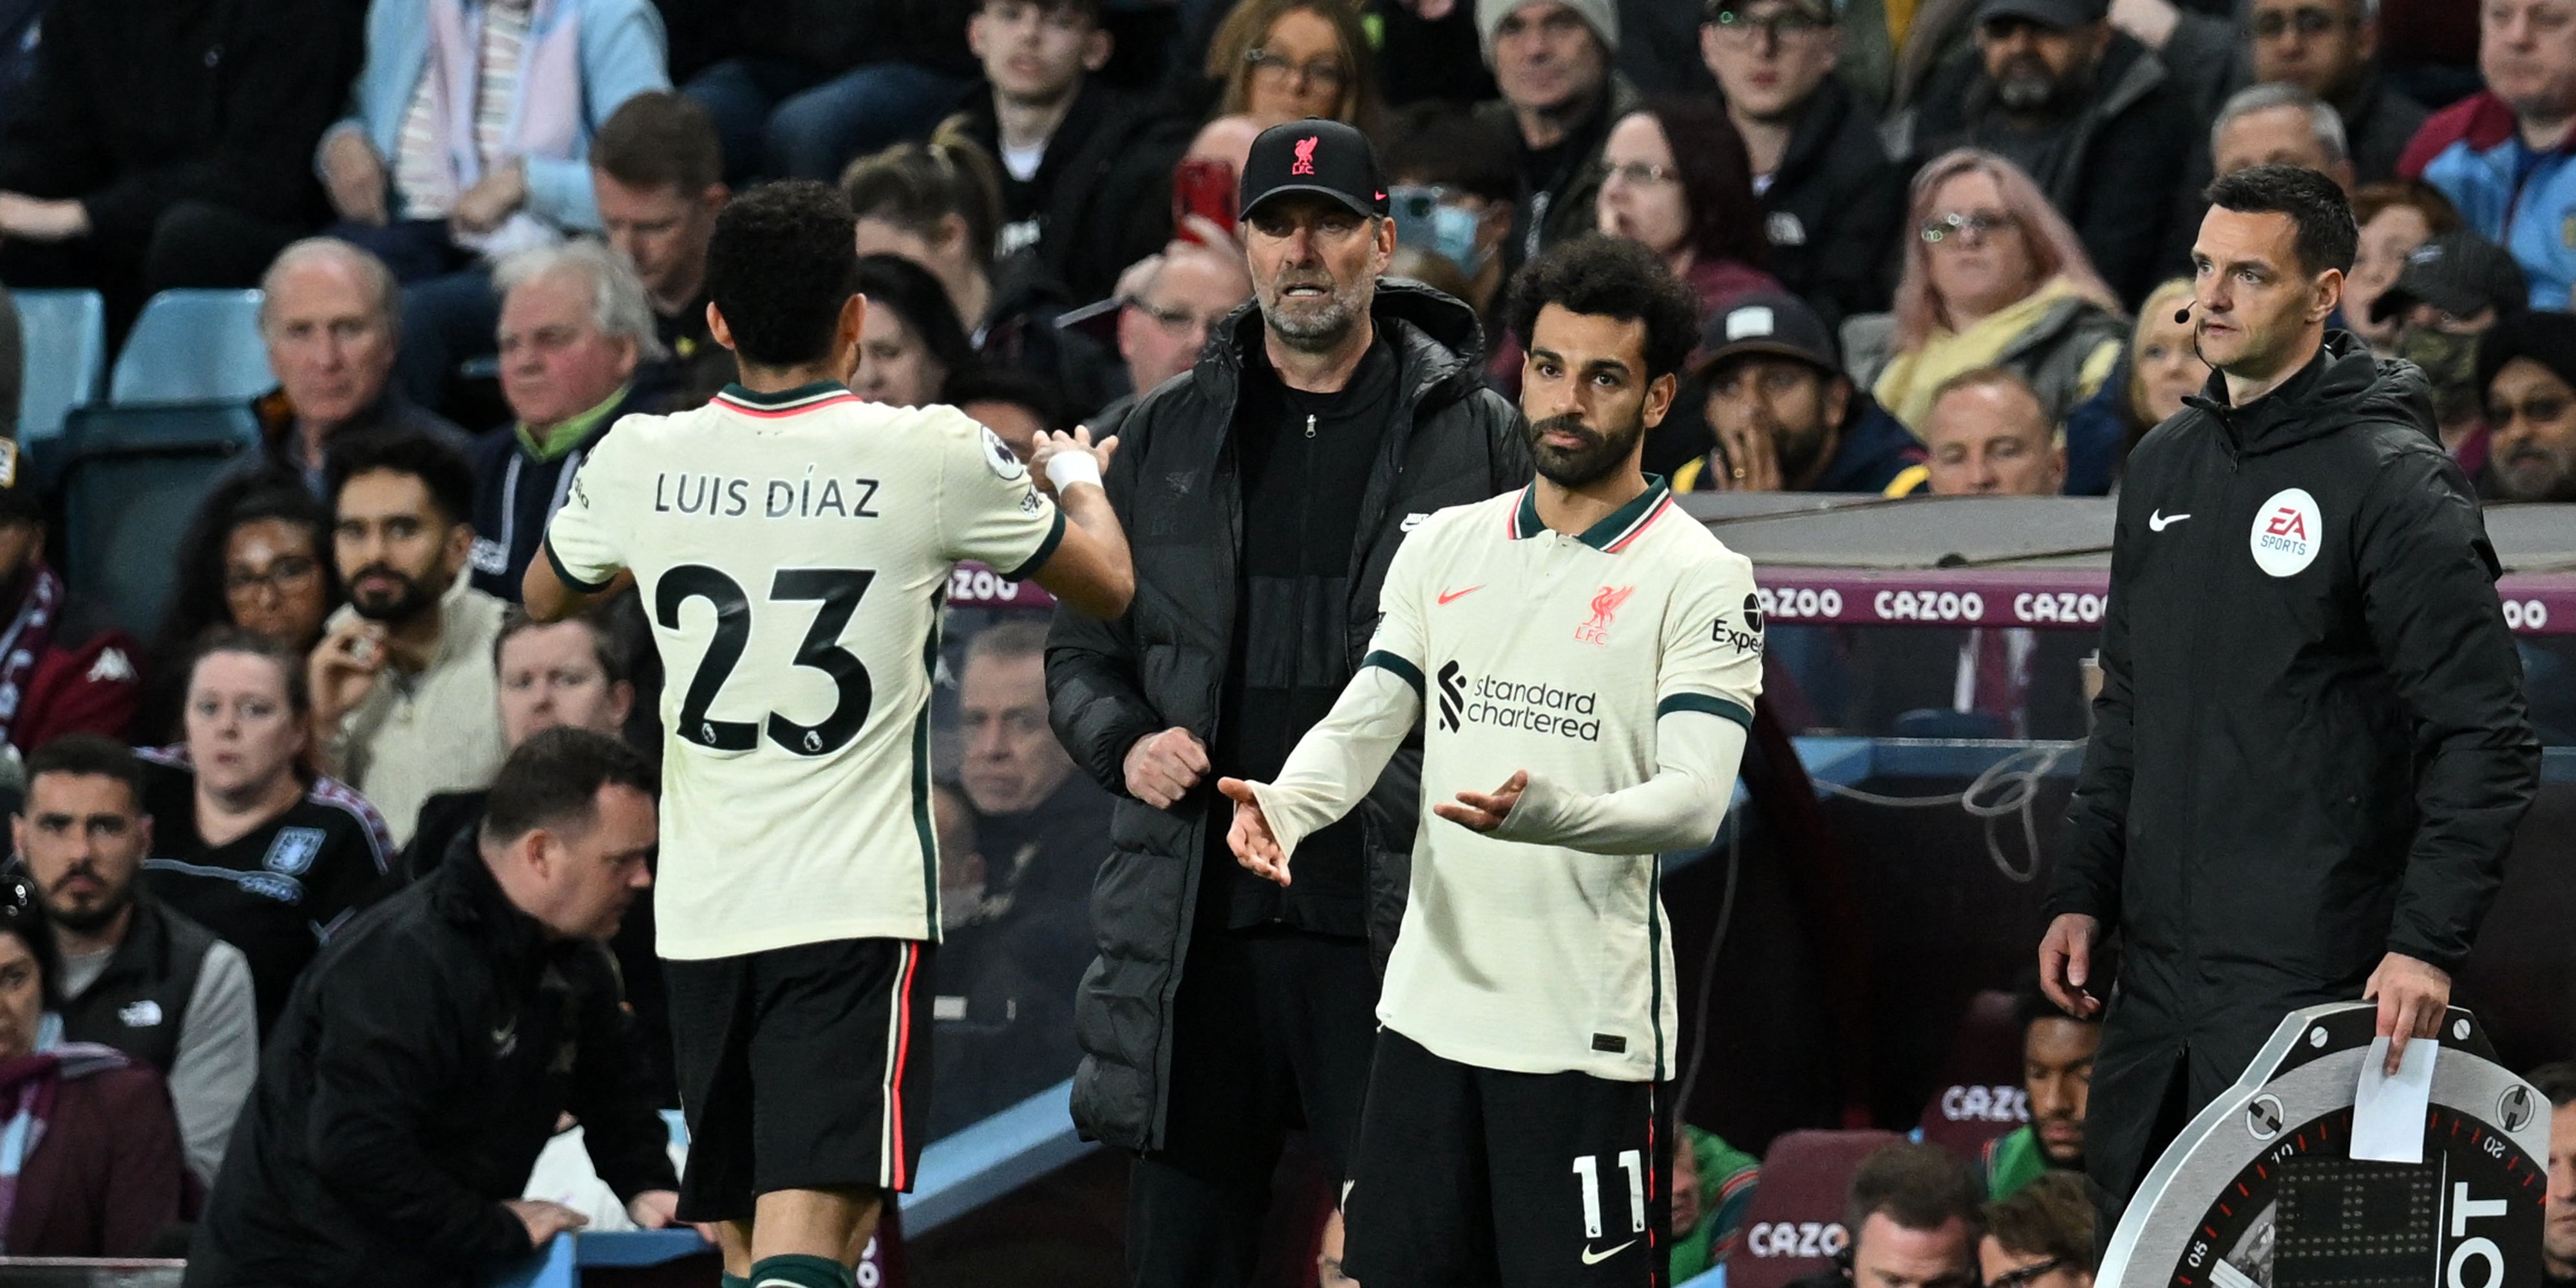 Luis Diaz’s Mum shares insight into his relationship with Liverpool teammates